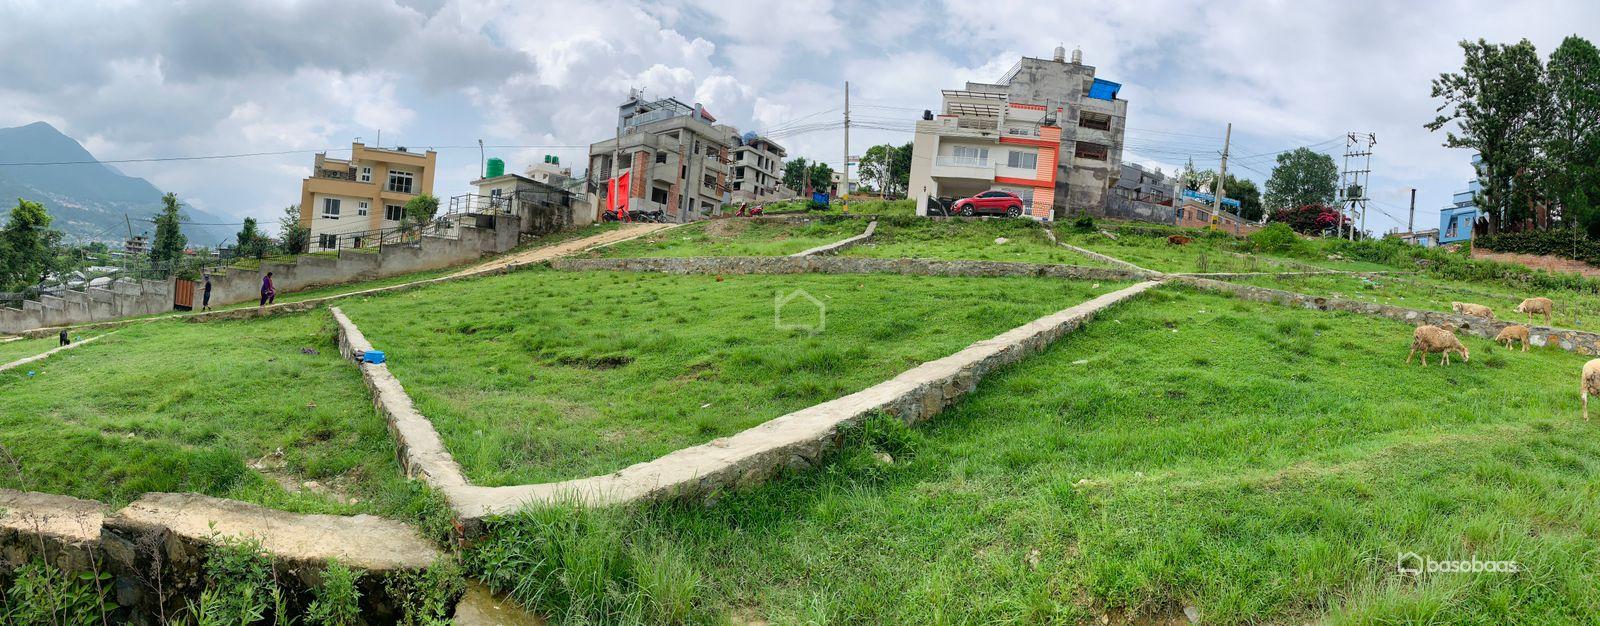 Residental Land : Land for Sale in Bhaisepati, Lalitpur Image 2